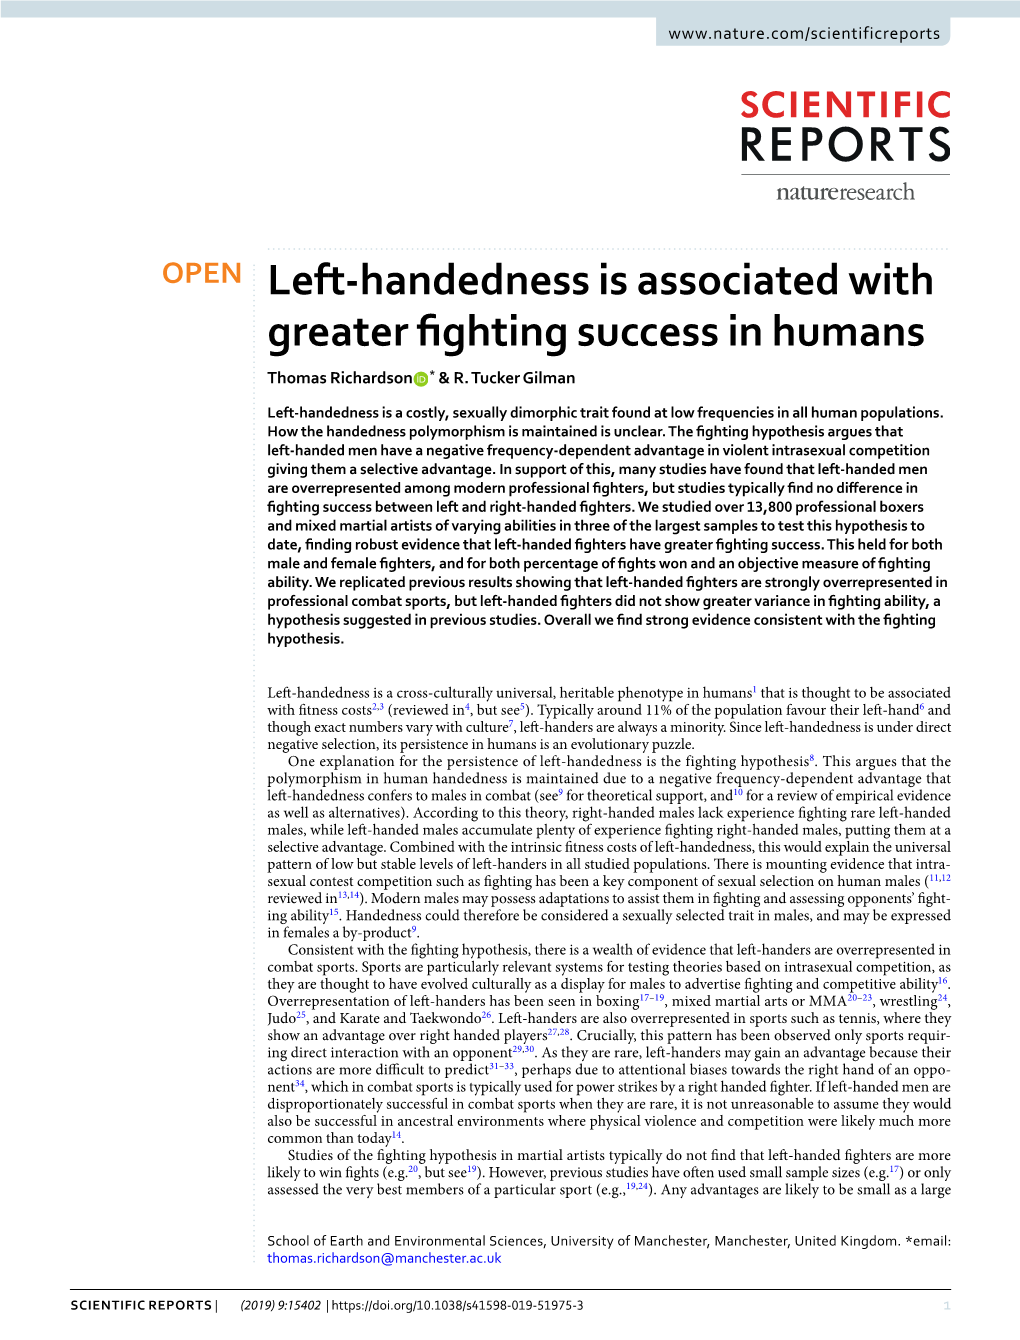 Left-Handedness Is Associated with Greater Fighting Success in Humans